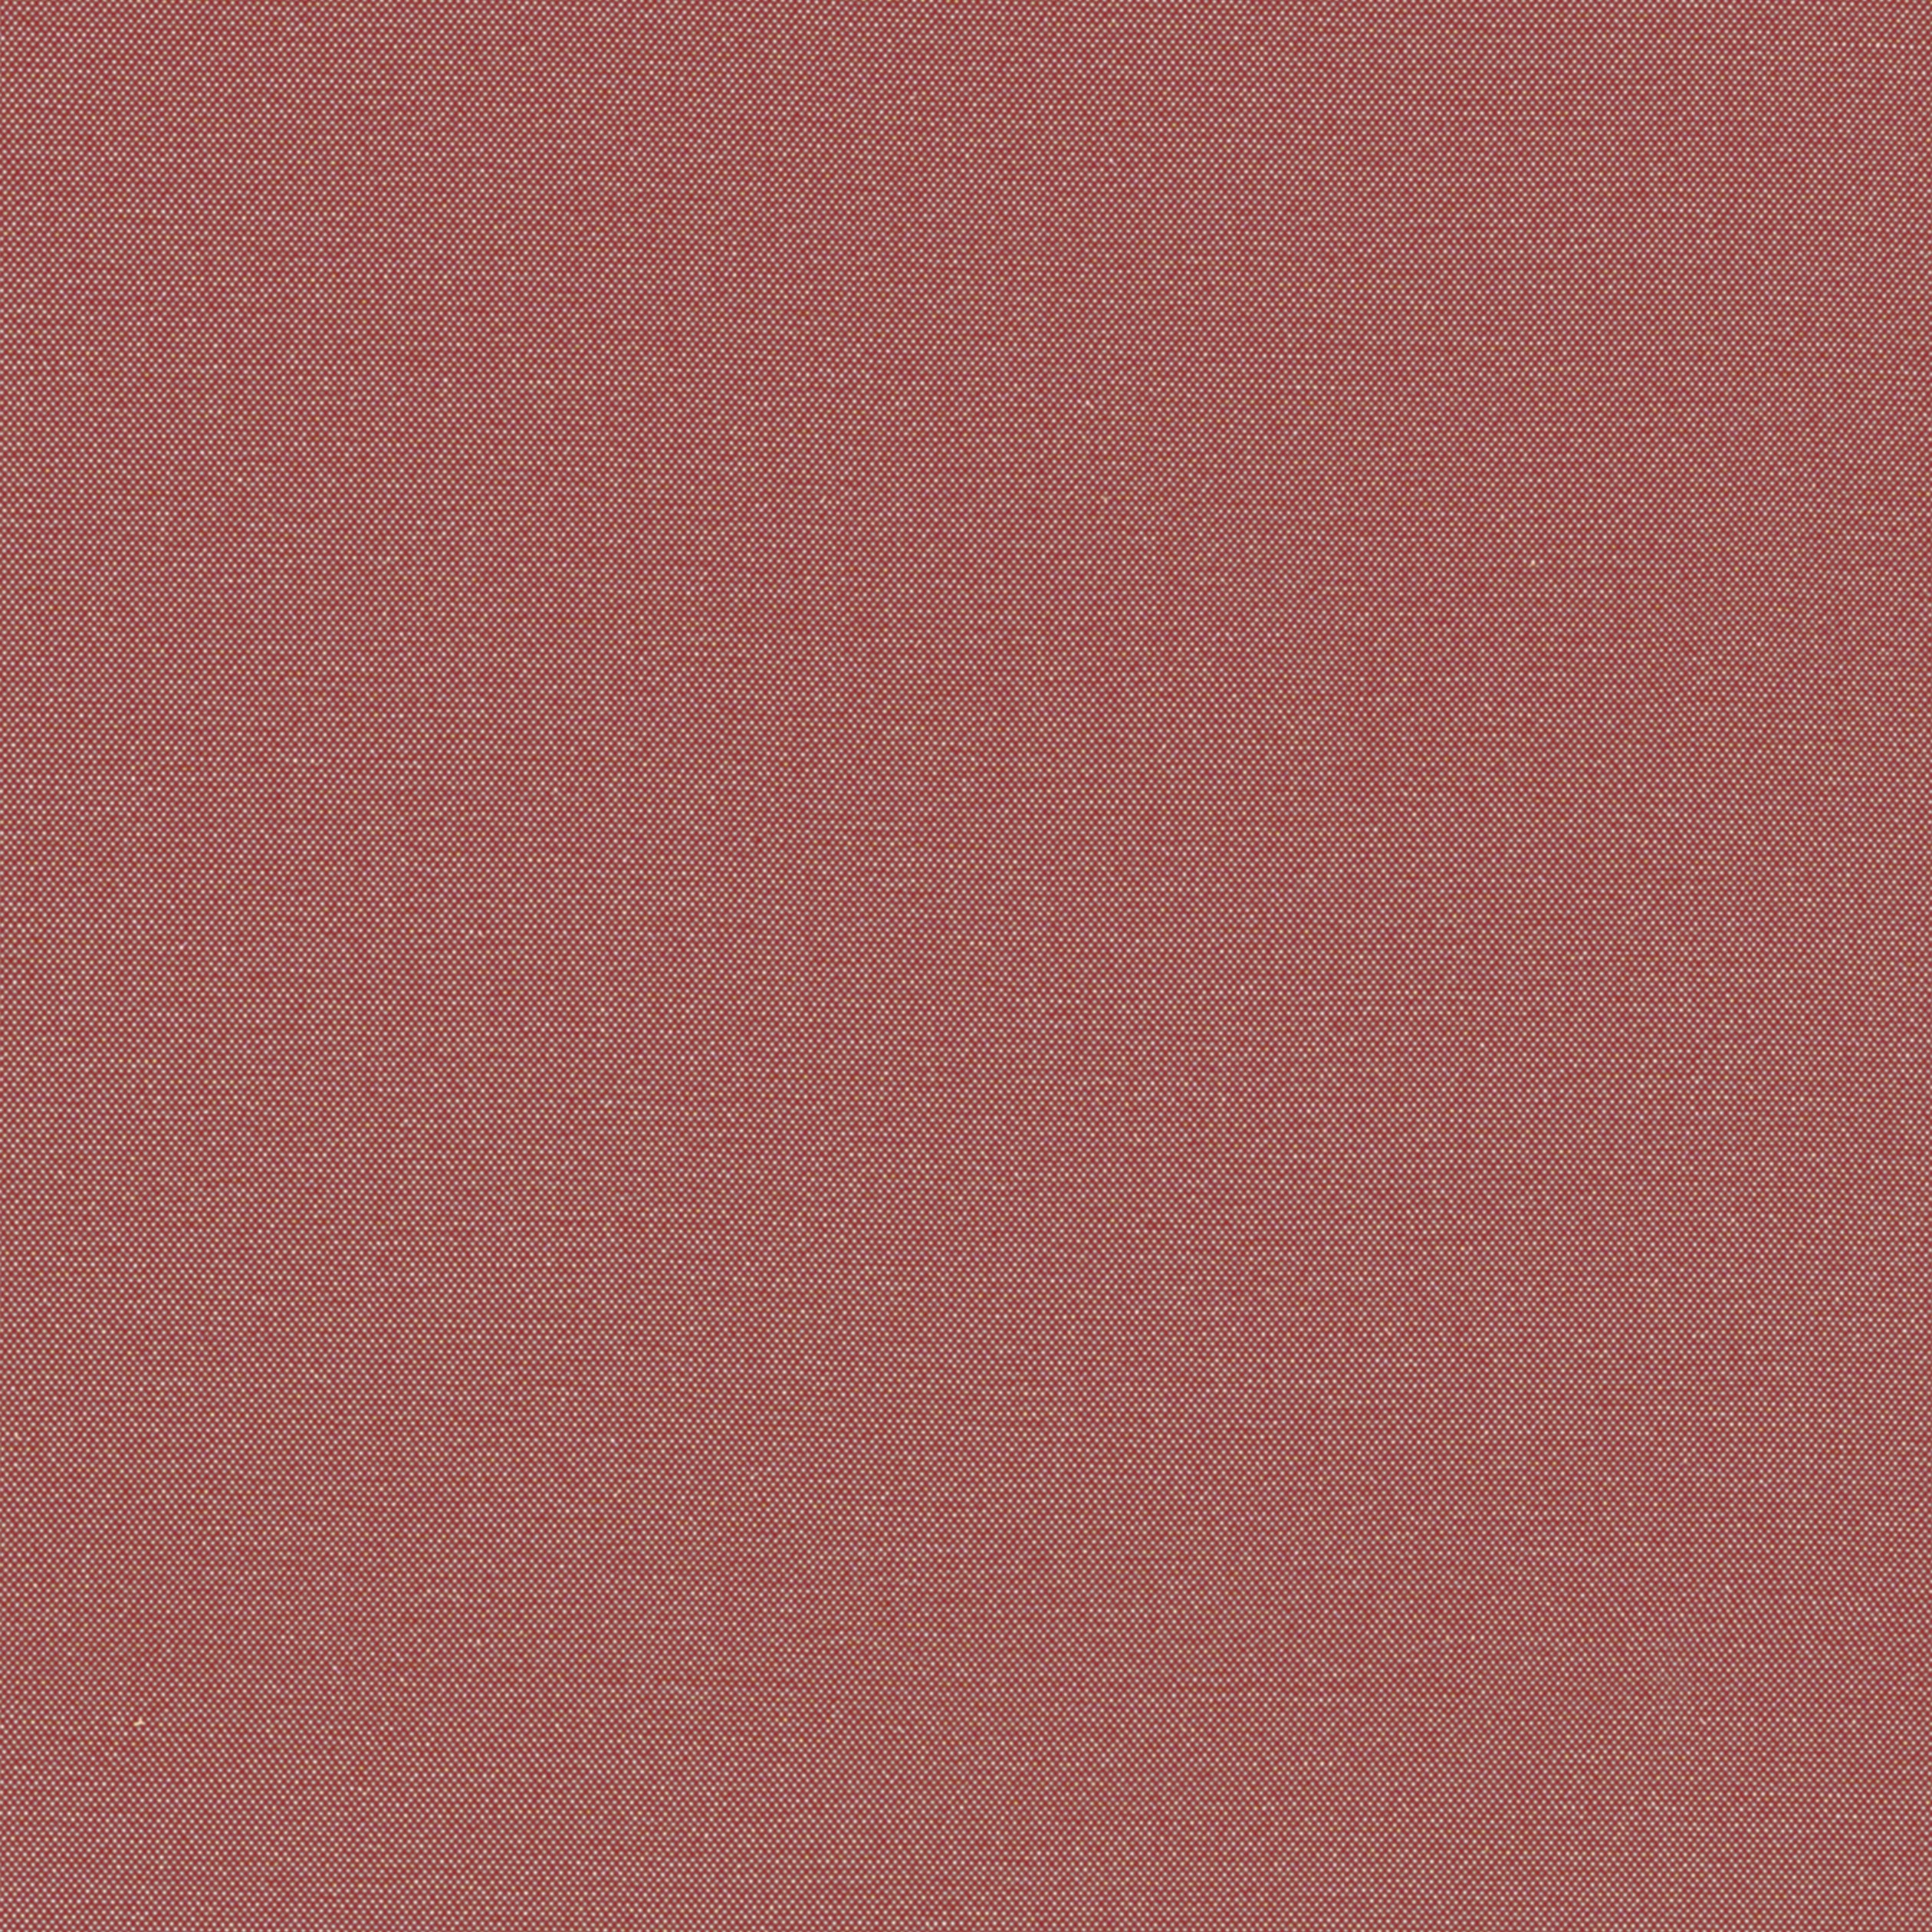 Tessa fabric in russet color - pattern number W81653 - by Thibaut in the Locale collection